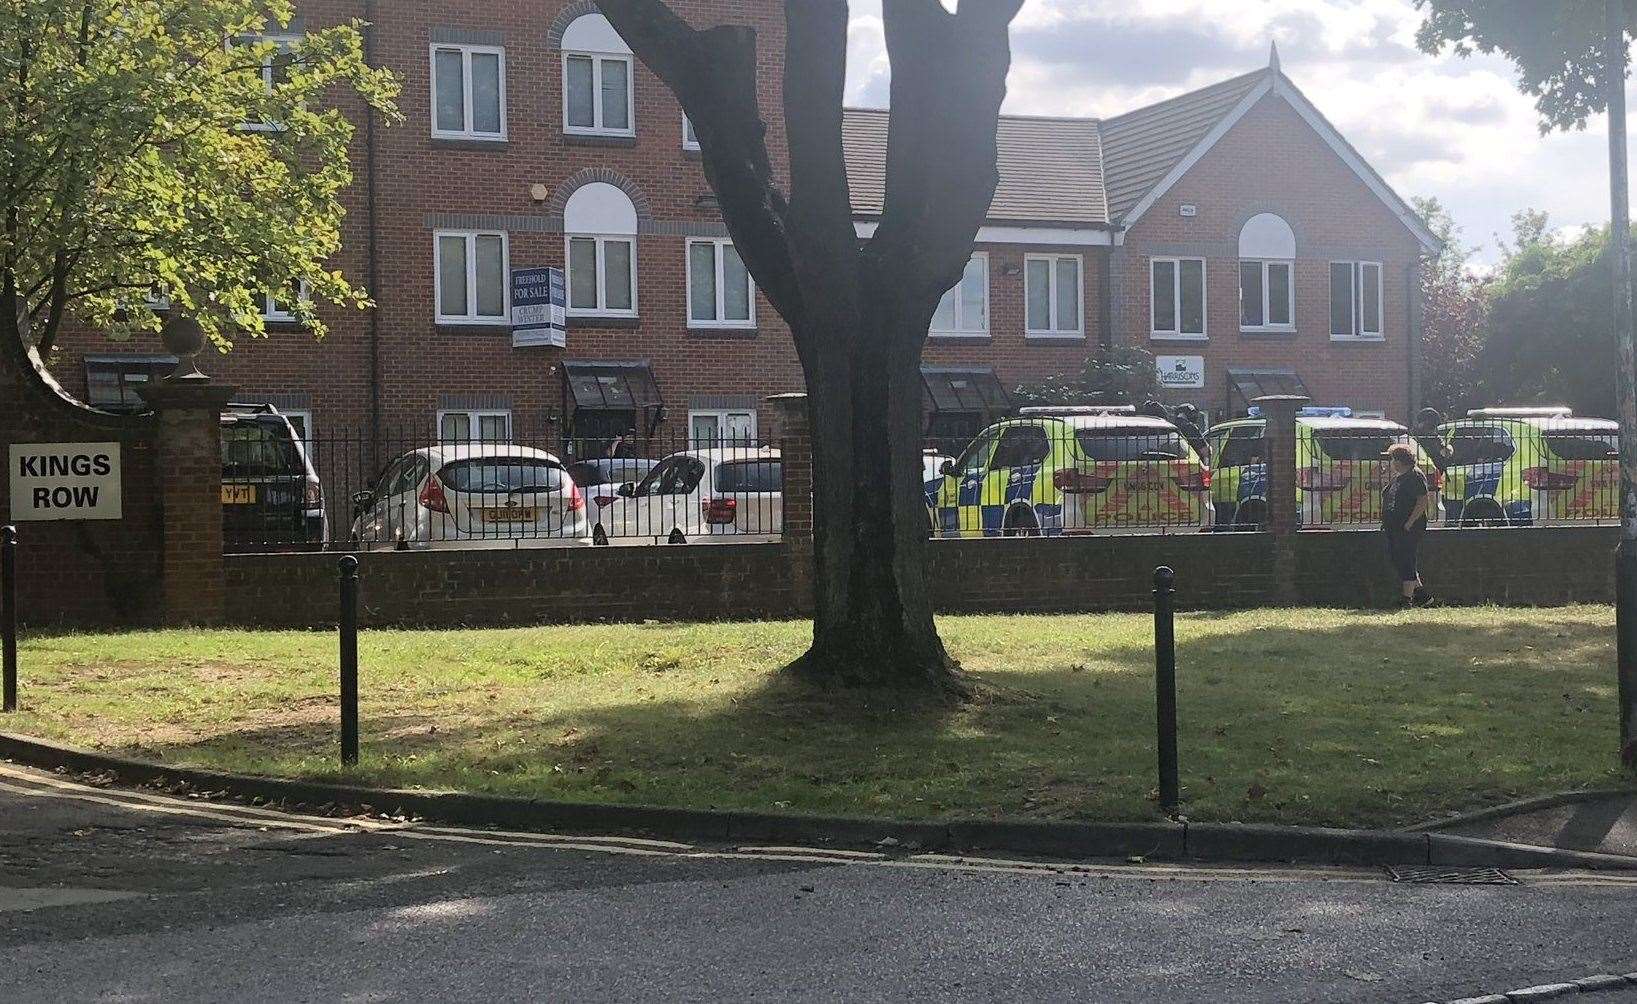 Armed police have been spotted in Kings Row, Armstrong Road. Picture: @rickyw2017